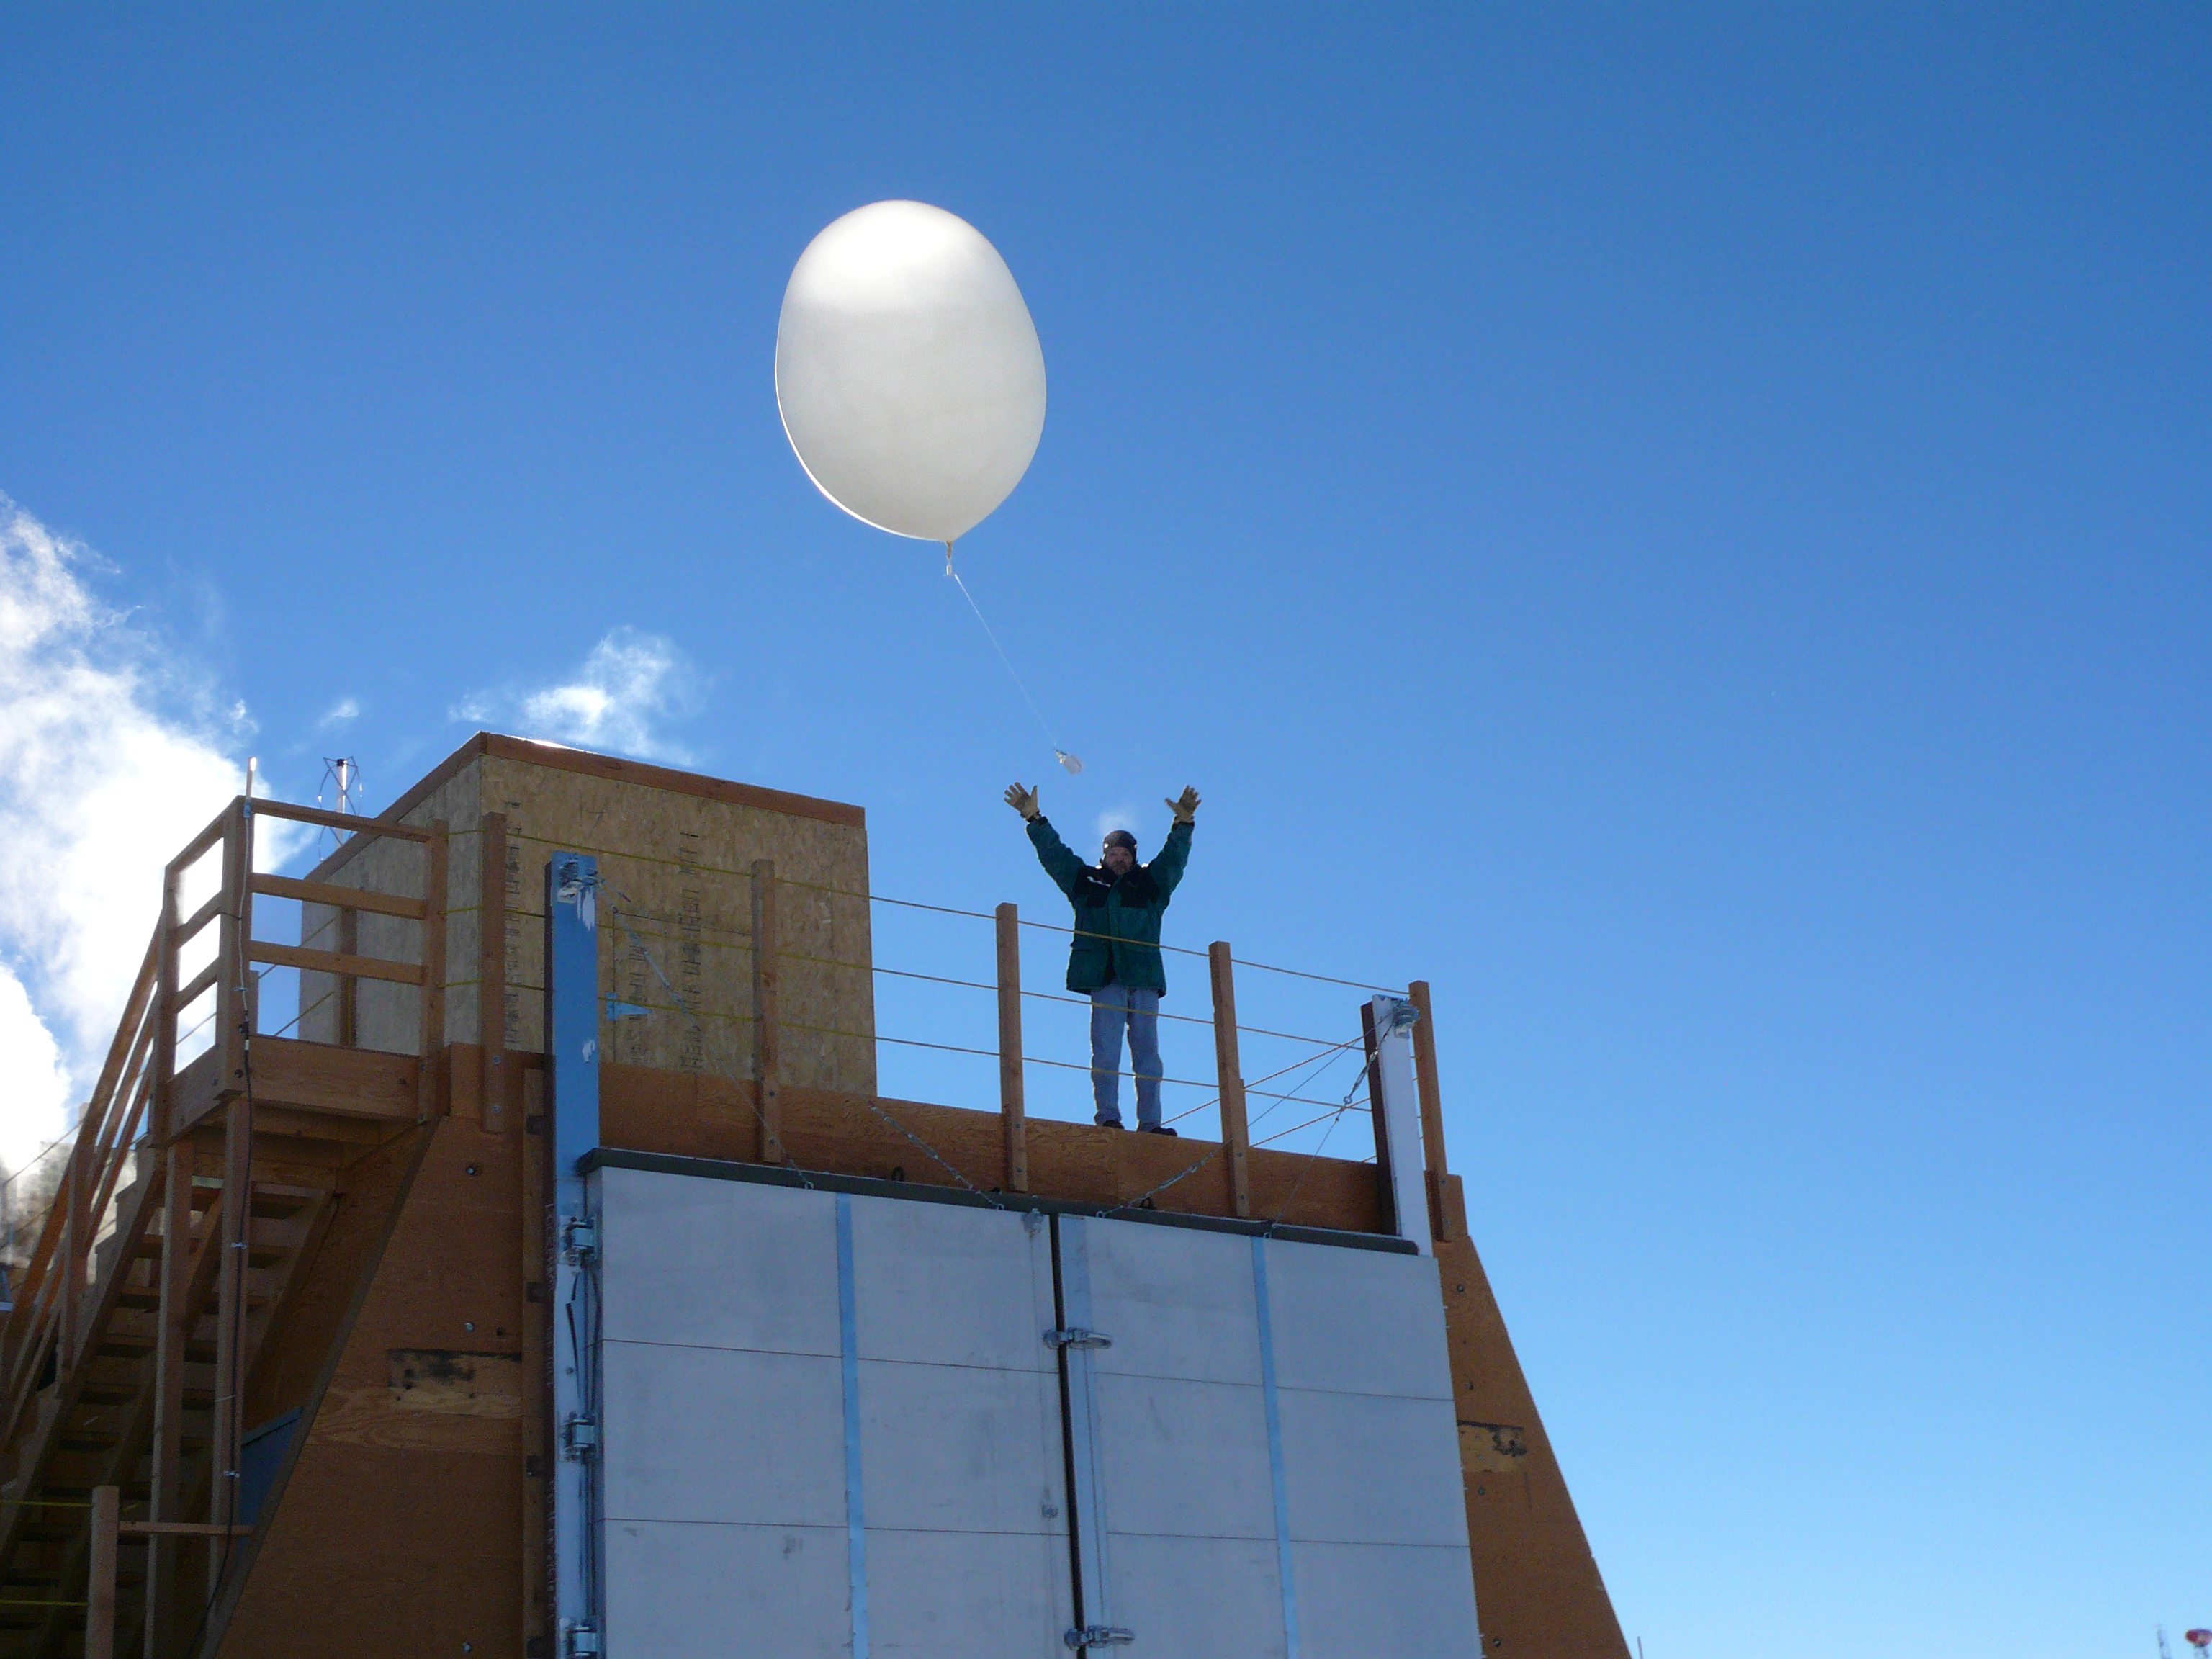 A person releases a large balloon into the air from the top of a building.